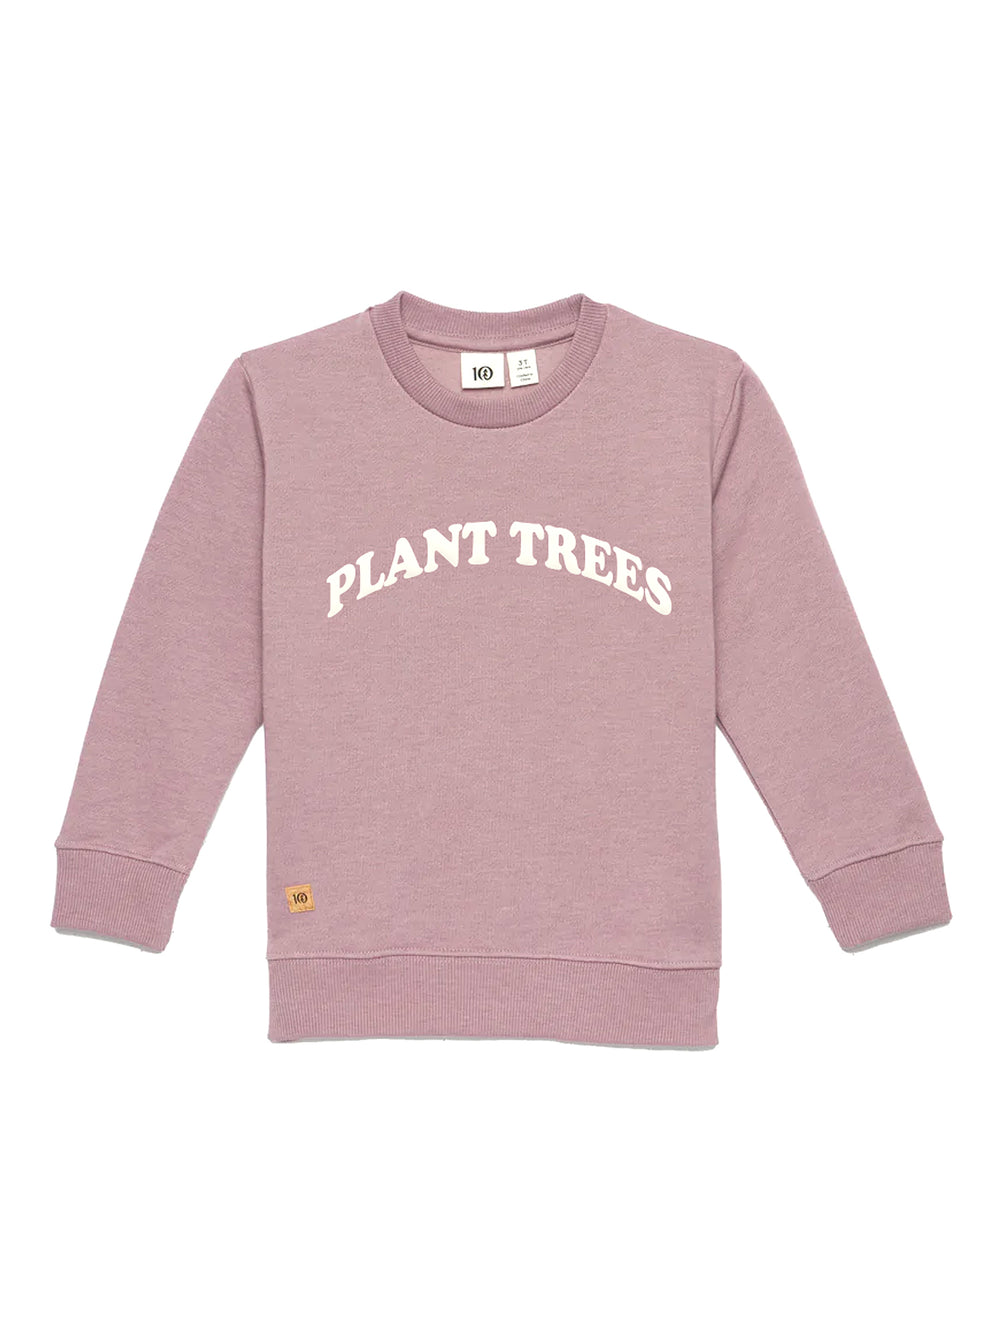 KIDS TENTREE LITTLE GIRLS PLANT TREES CREW - CLEARANCE